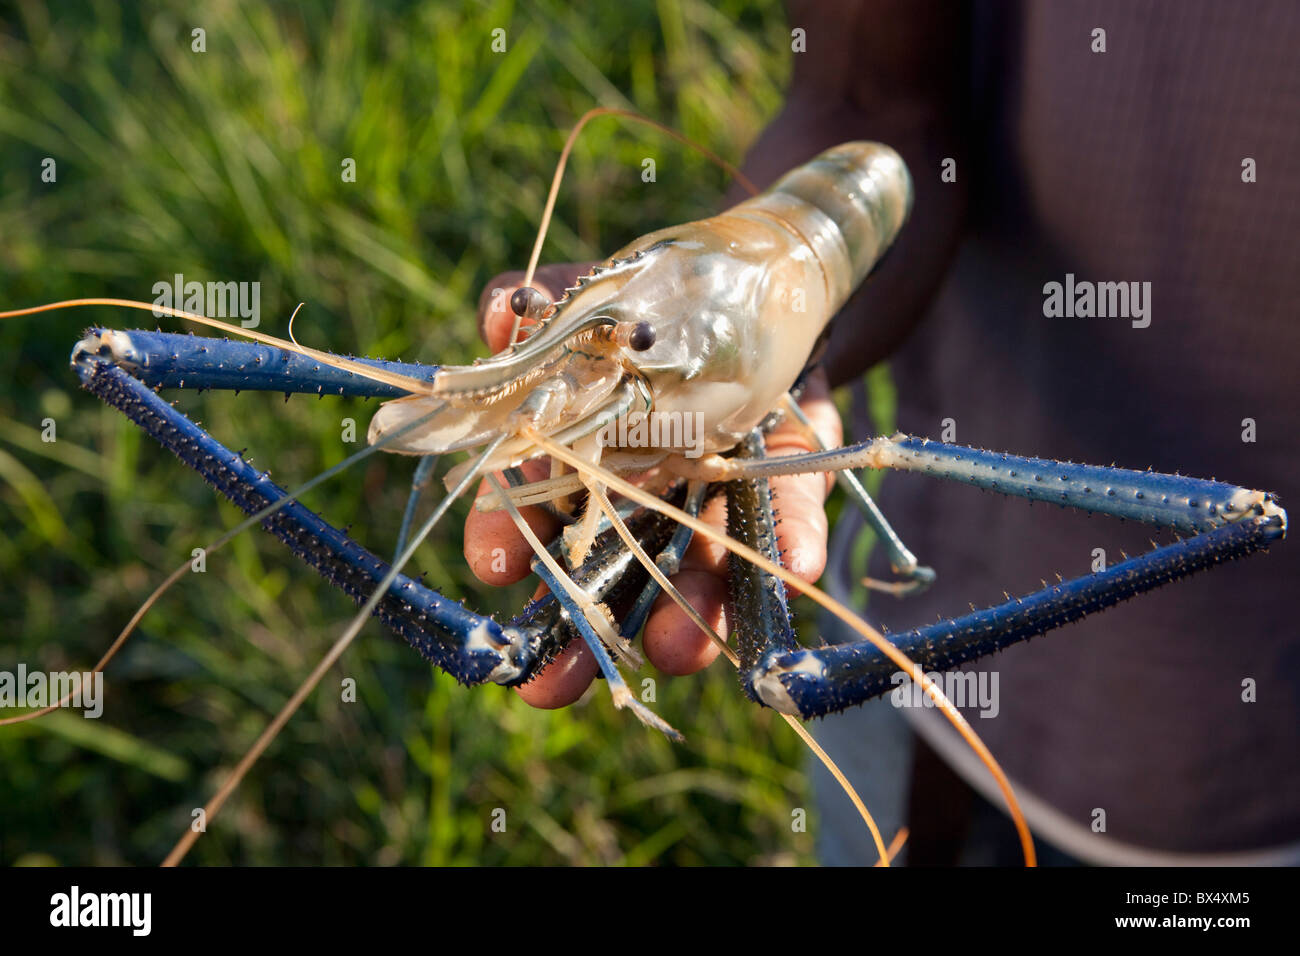 A Hand Holding A Freshwater Shrimp; Manica, Mozambique, Africa Stock Photo